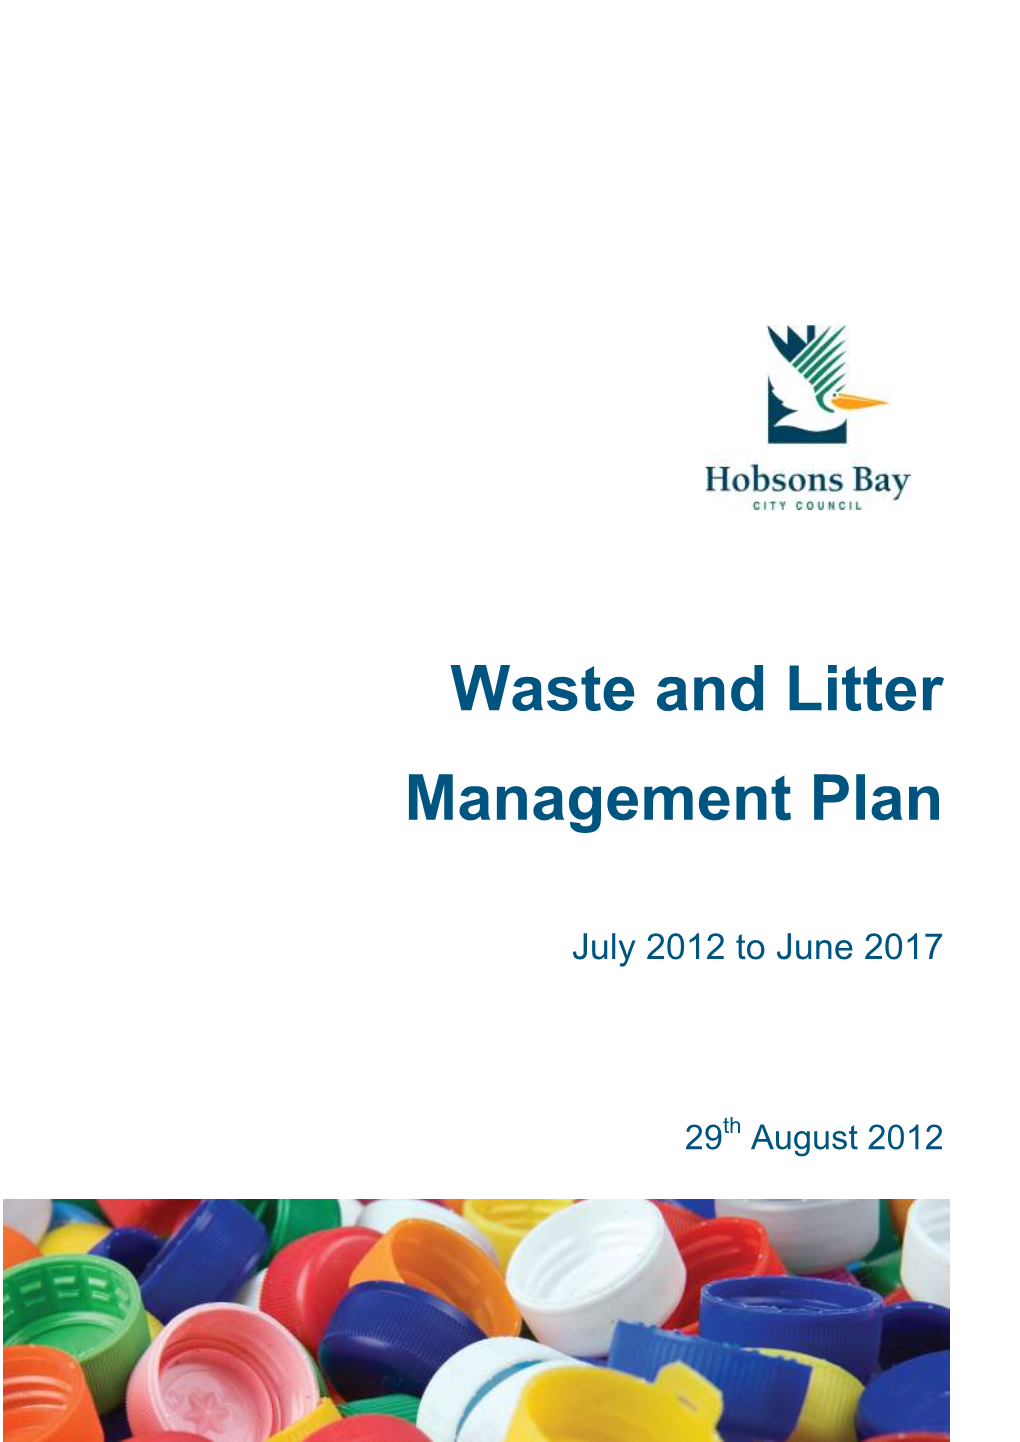 Waste and Litter Management Plan